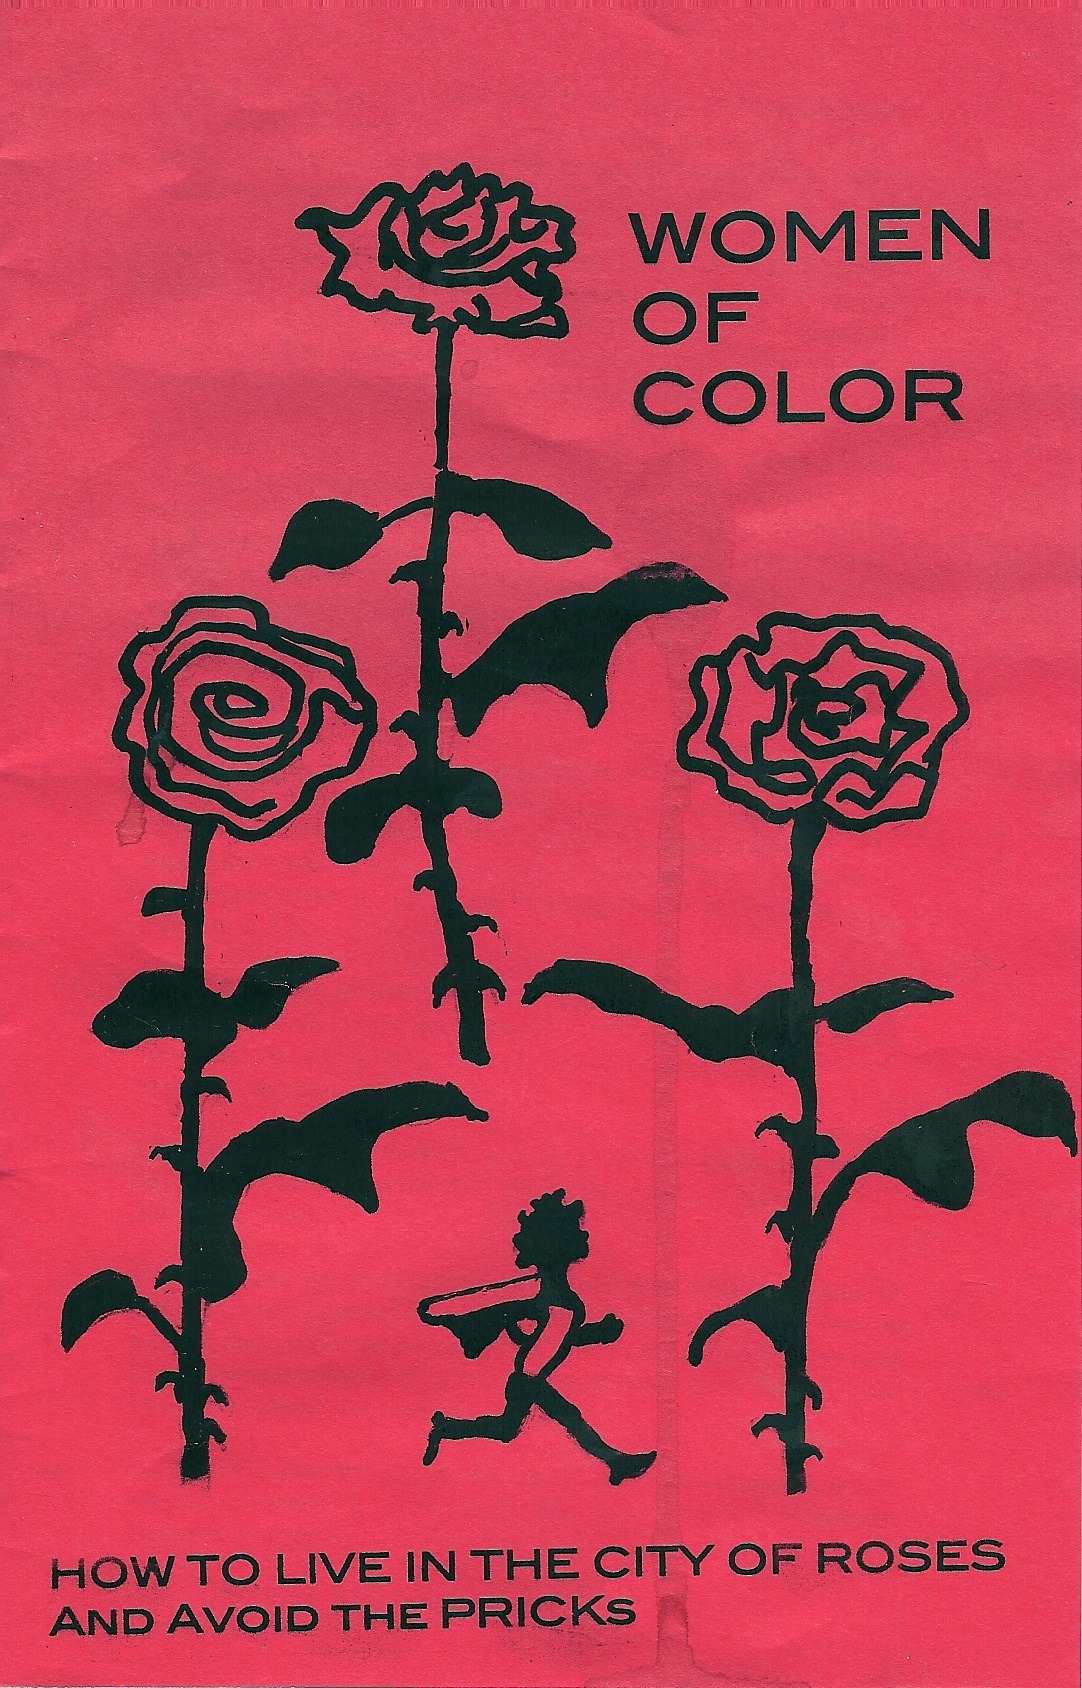 zine: women of color: how to live in the city of roses and avoid the pricks
tonya l. jones & cathy camper
2011